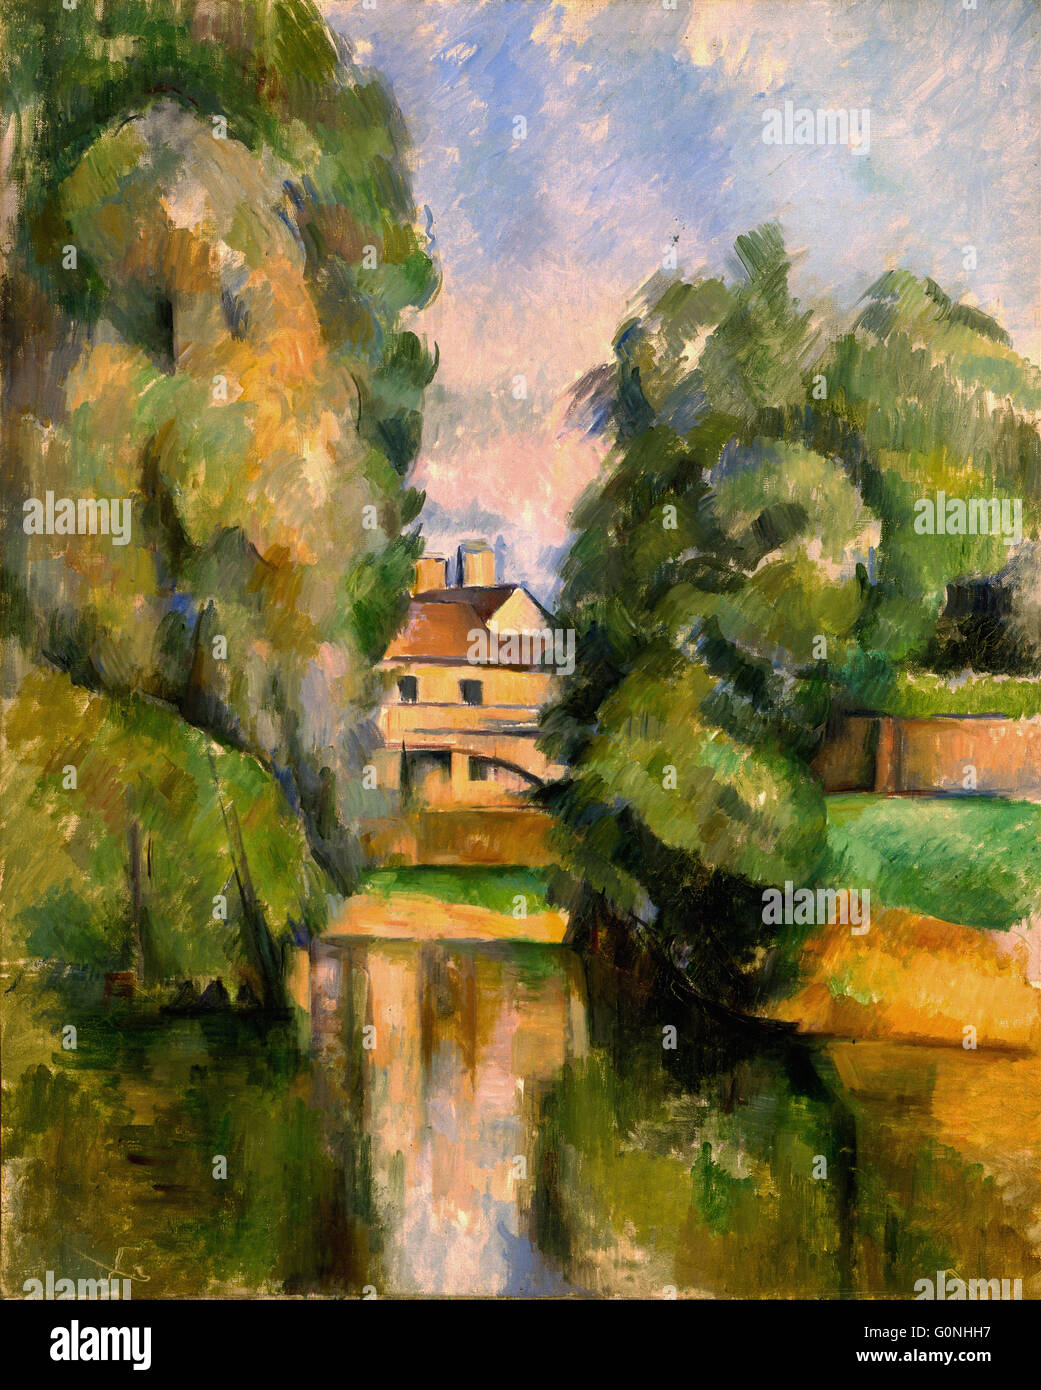 Paul Cézanne - Country House by a River Stock Photo